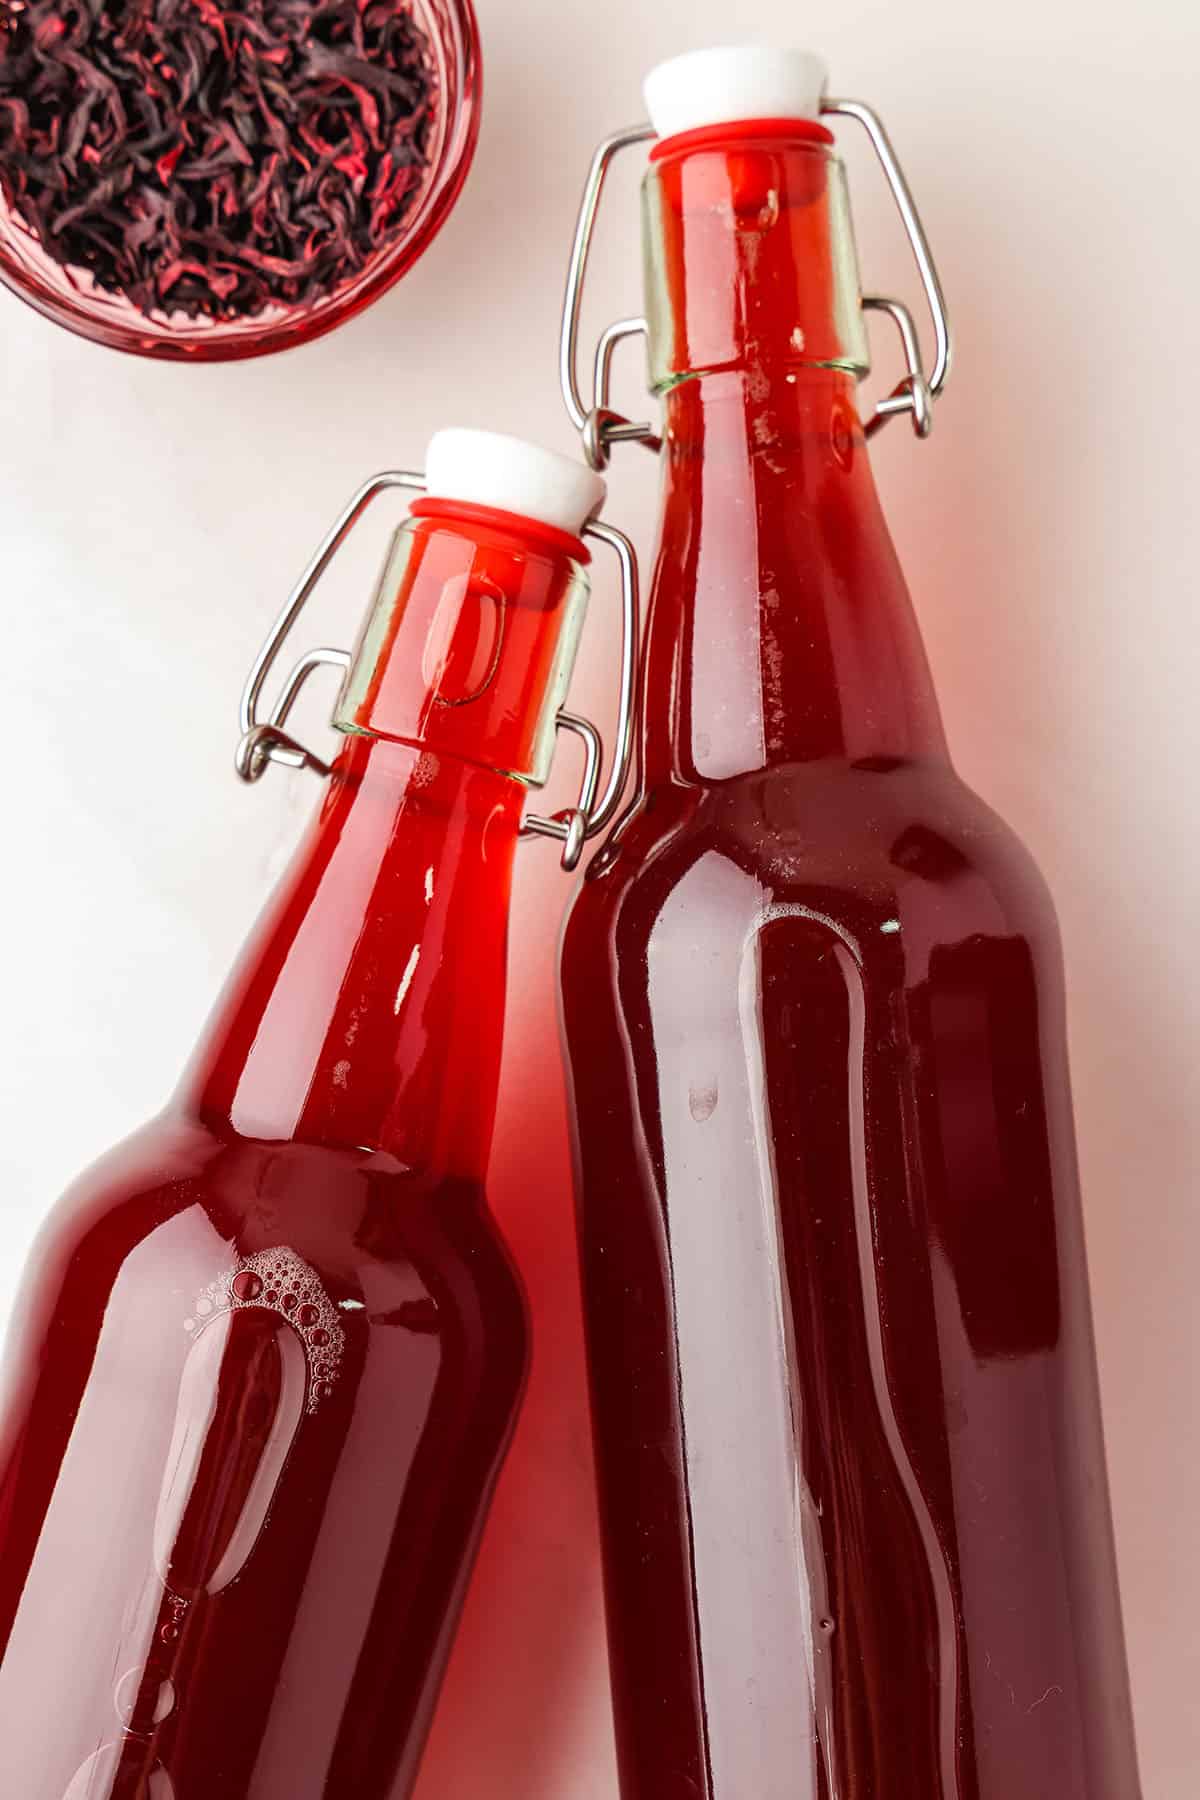 2 bottles filled with hibiscus kombucha, with a small pink bowl filled with loose hibiscus tea to the upper left. 